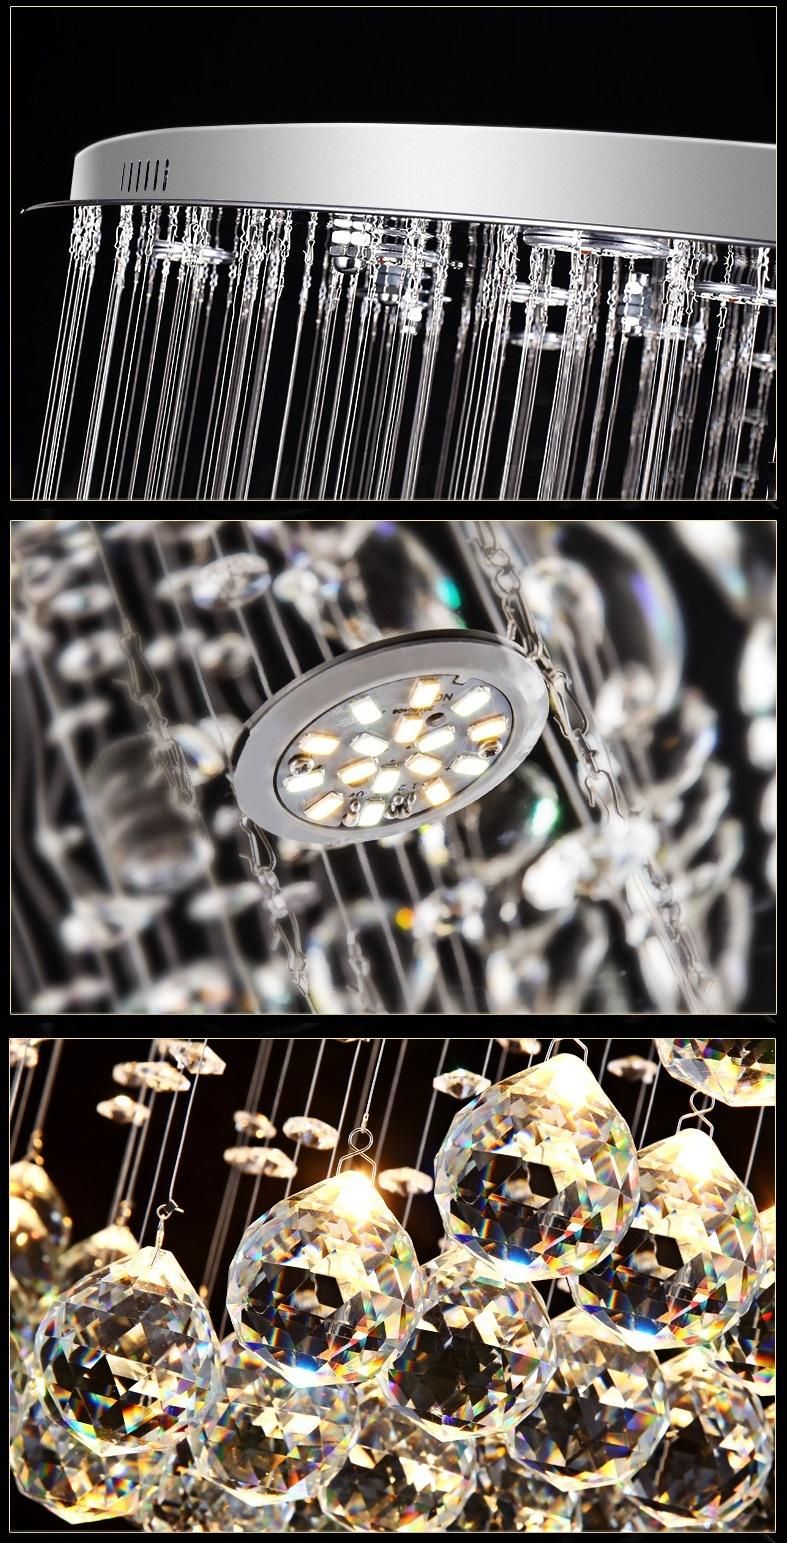 Round Crystal Pendant Lighting Ceiling Light Chandelier Droplights Zf-Cl-033